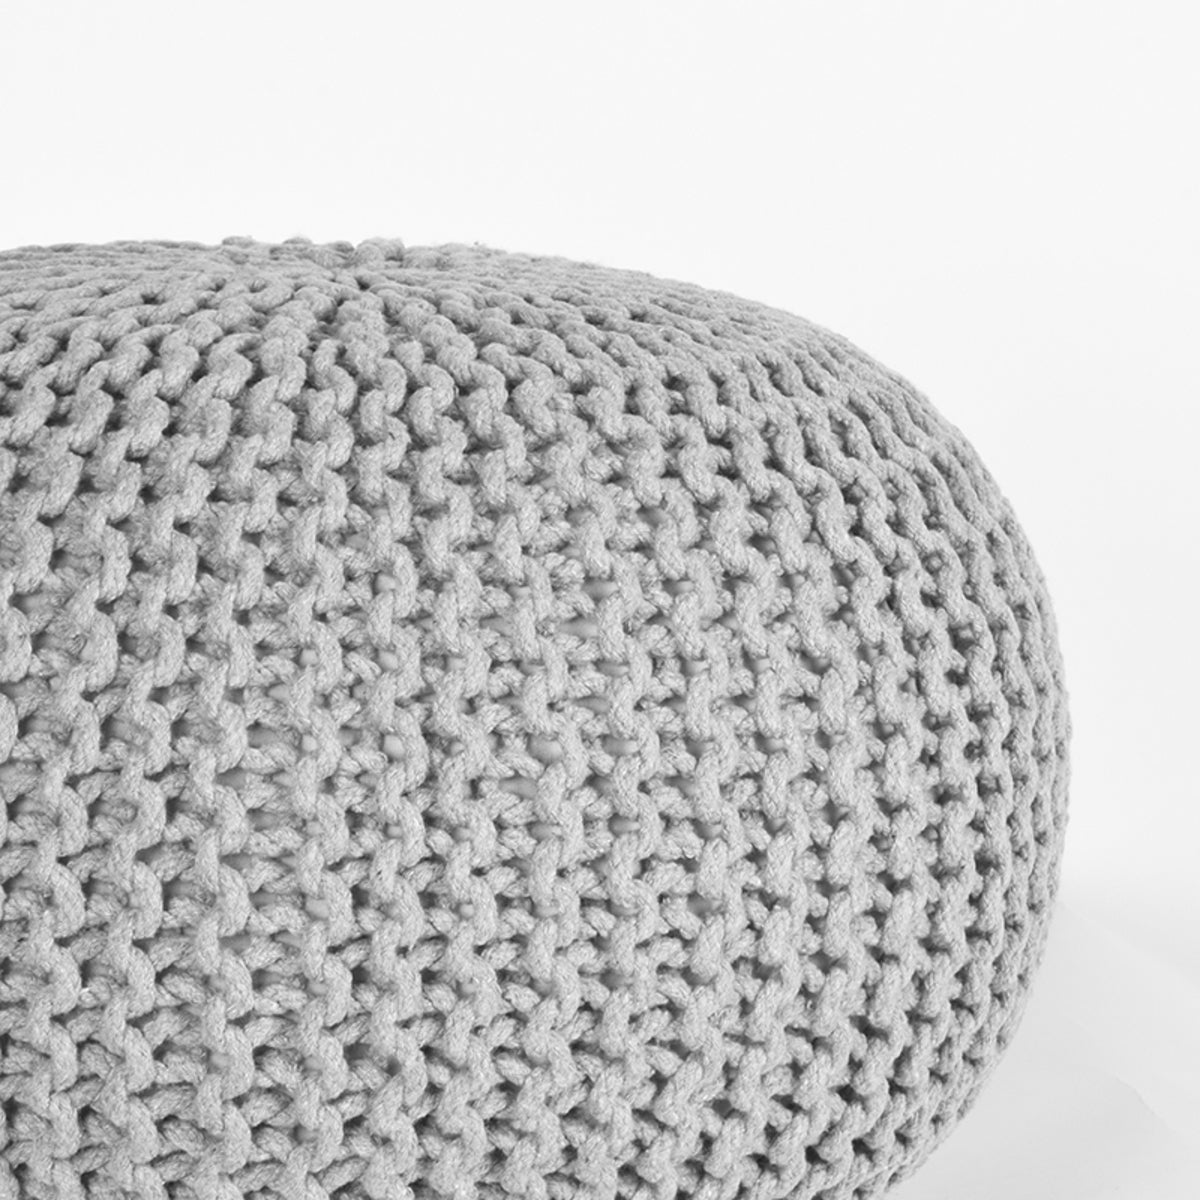 LABEL51 Pouf Knitted - Light gray - Cotton - M